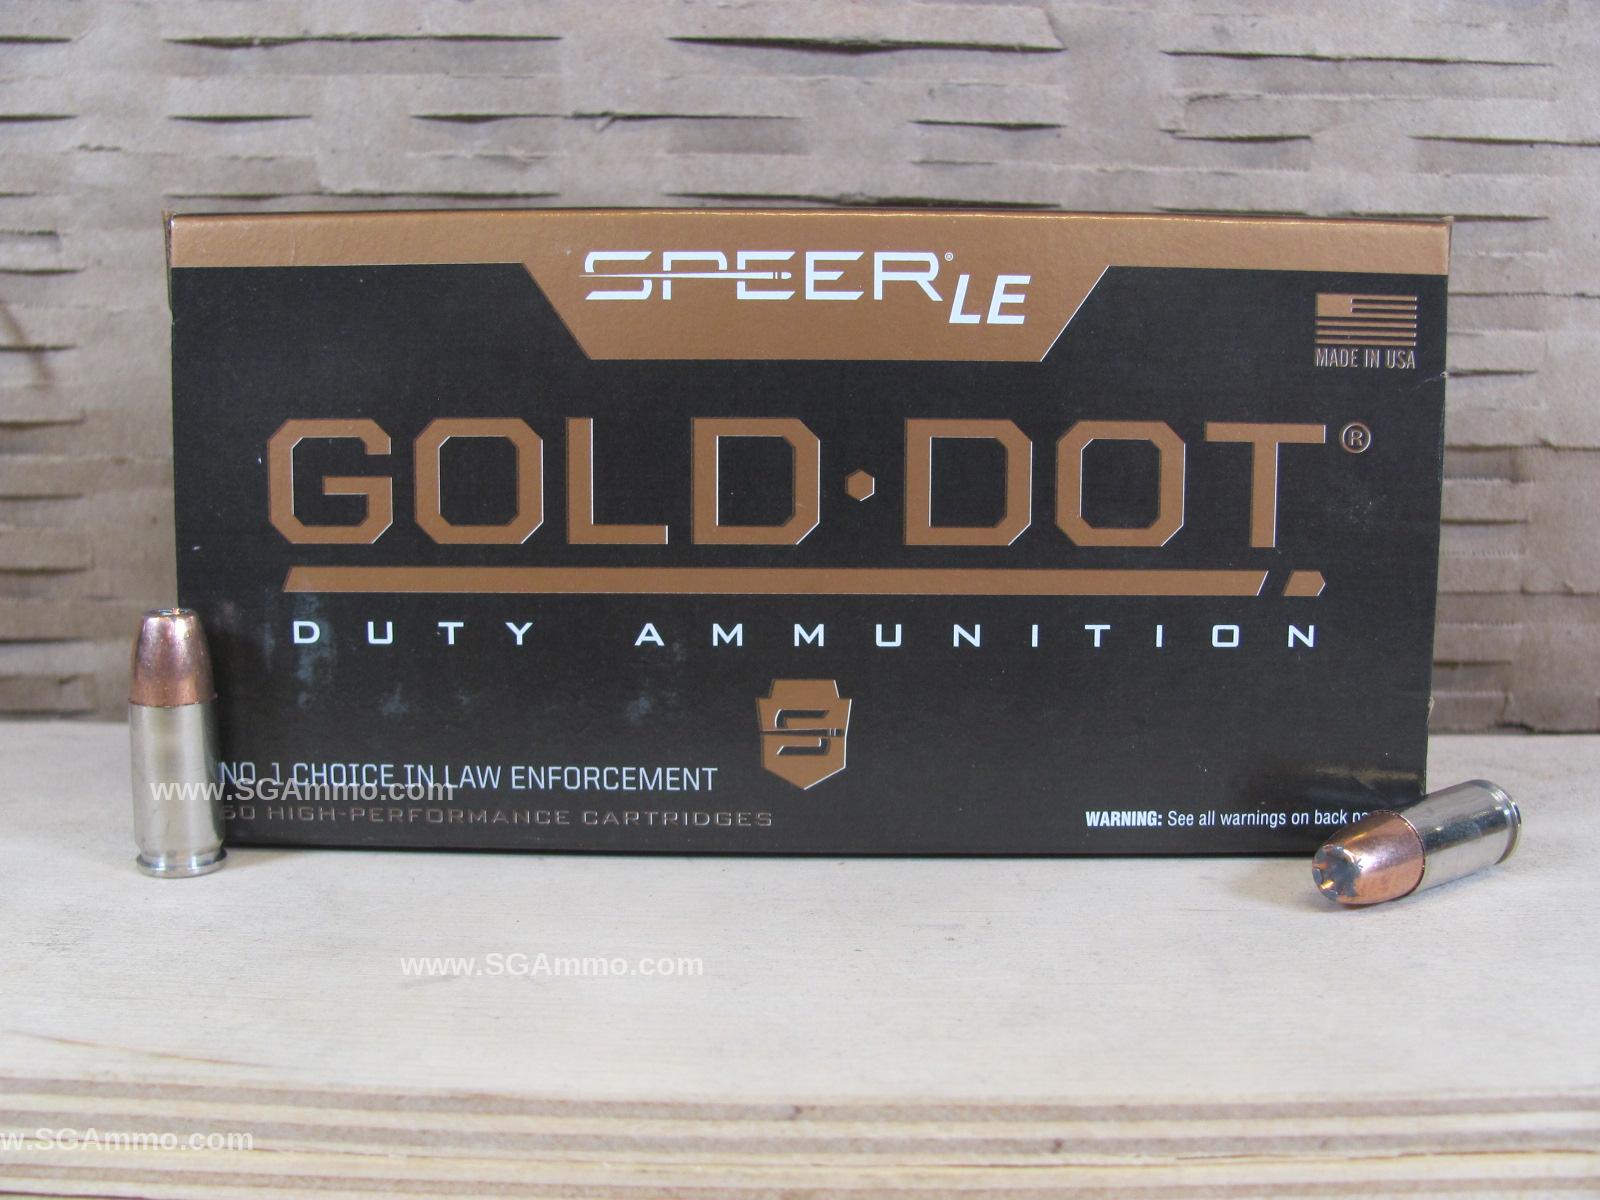 250 Round Plastic Can - 9mm Speer Gold Dot 115 Grain Hollow Point LE Ammo - 53614 - Packed in Small Plastic Canister